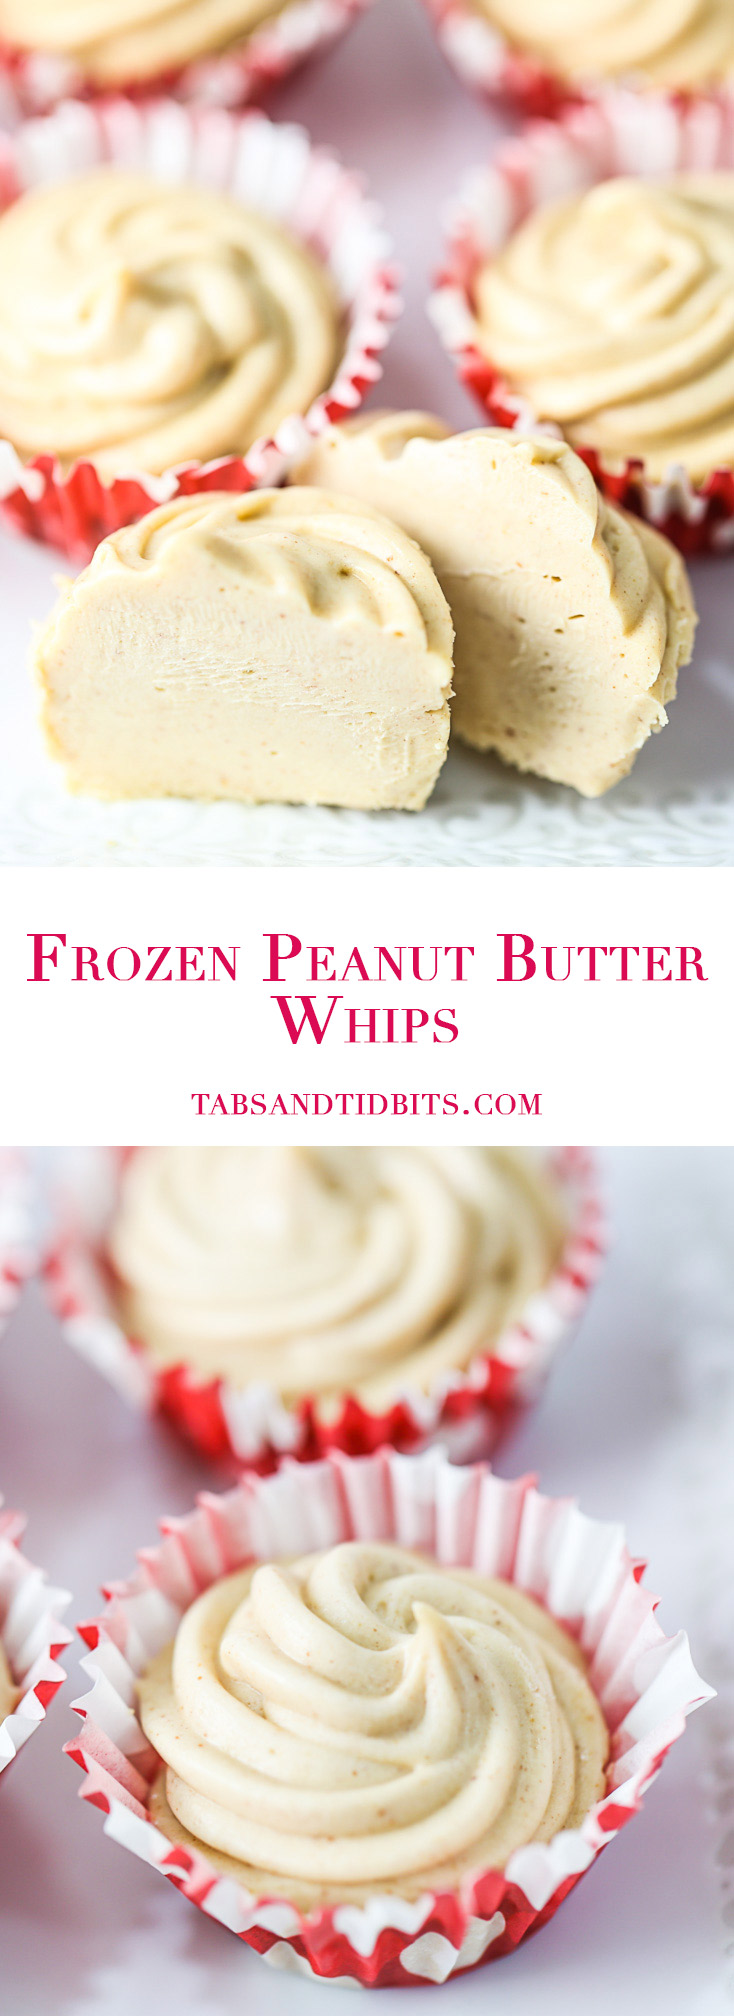 Frozen Peanut Butter Whips - Two-ingredient frozen and creamy peanut butter treats that melt in your mouth.